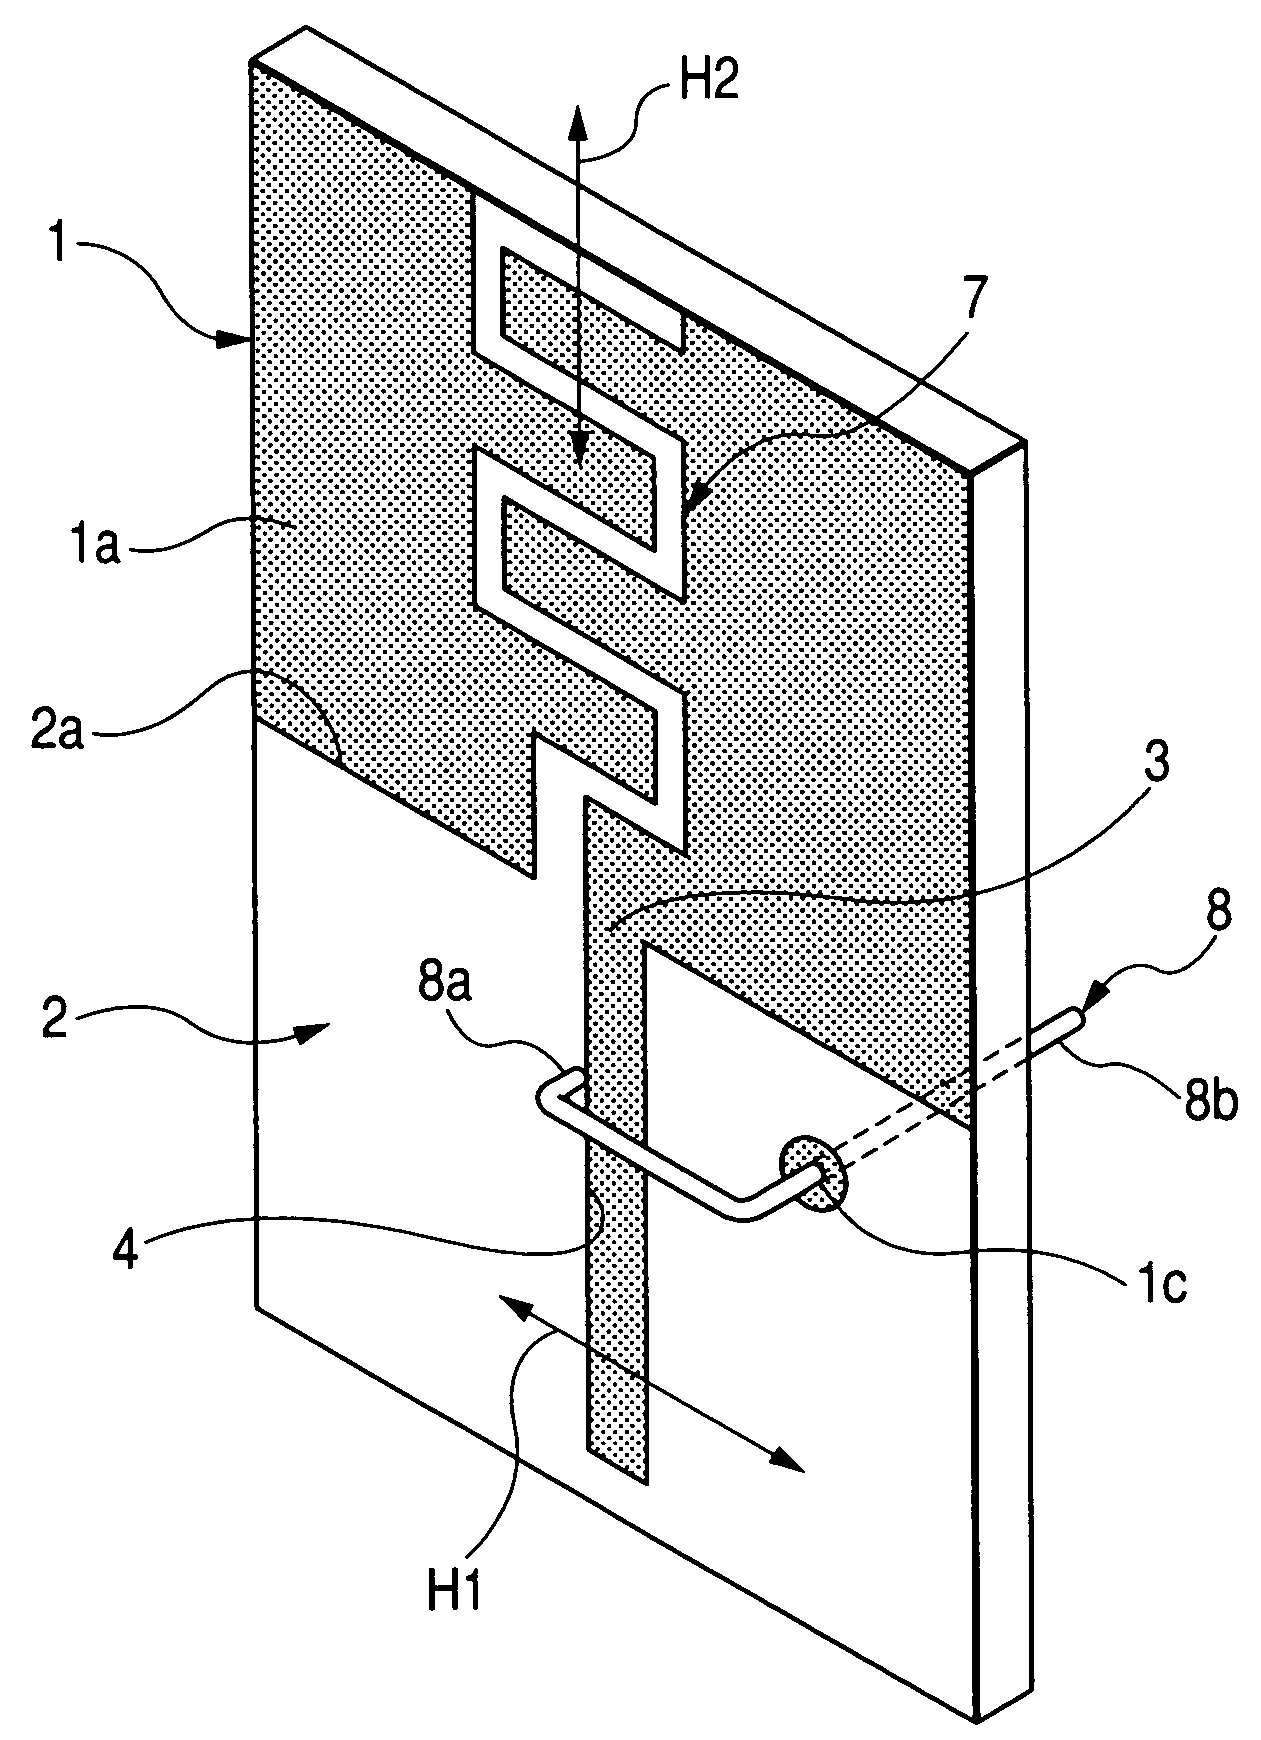 Antenna device having radiation characteristics suitable for ultrawideband communications